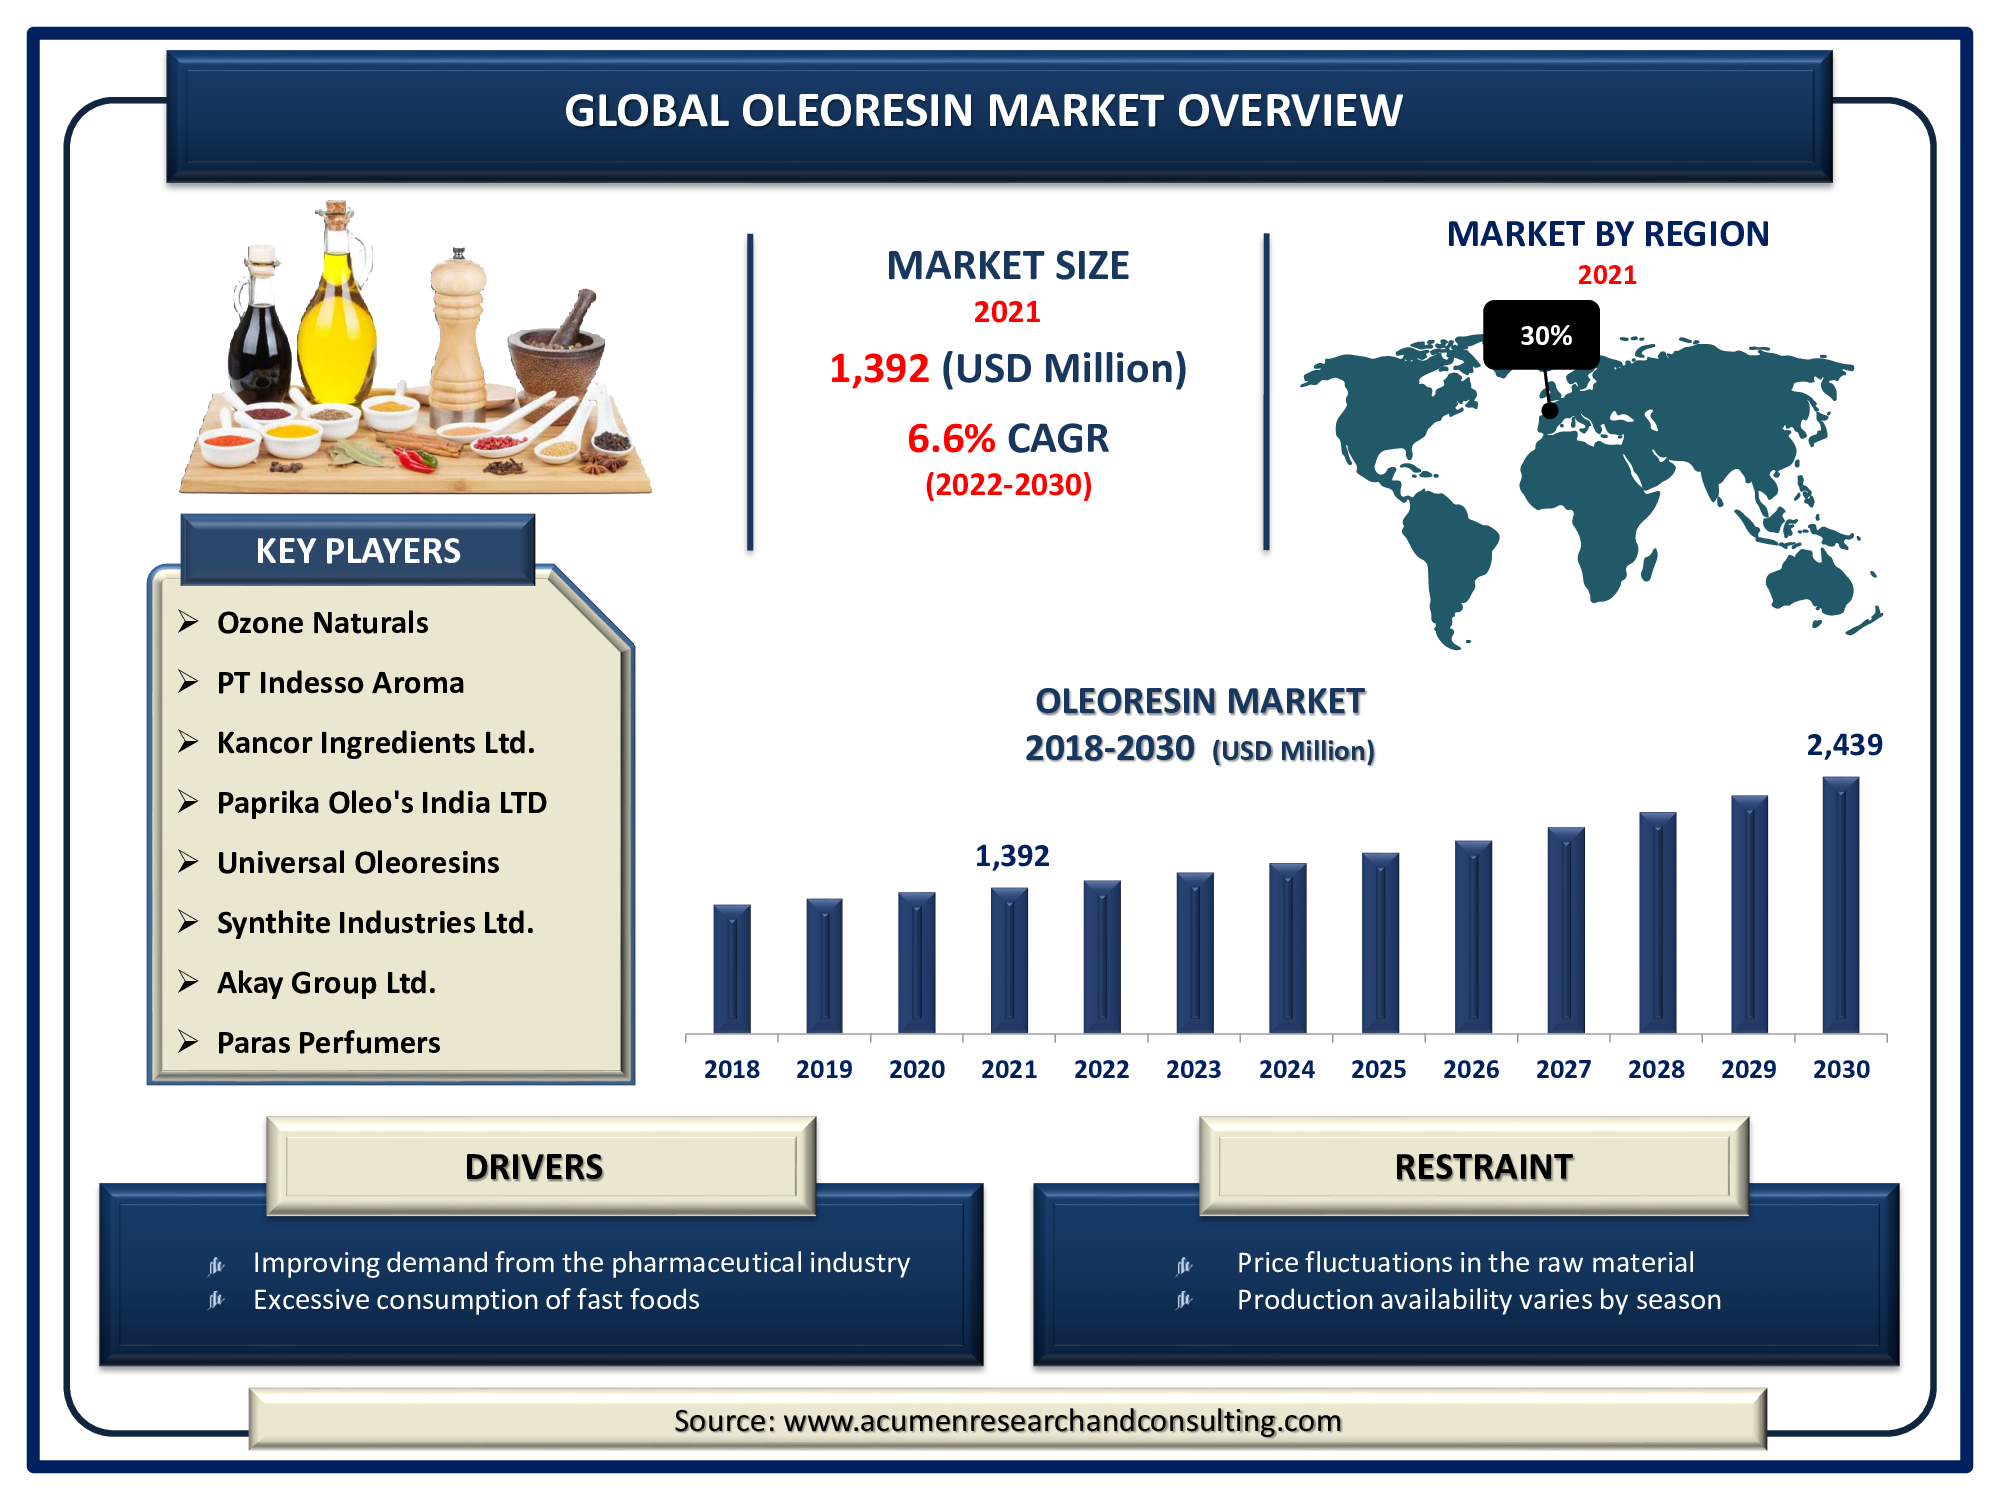 Oleoresin Market is expected to reach USD 2,439 Mn by 2030 with a considerable CAGR of 6.6%